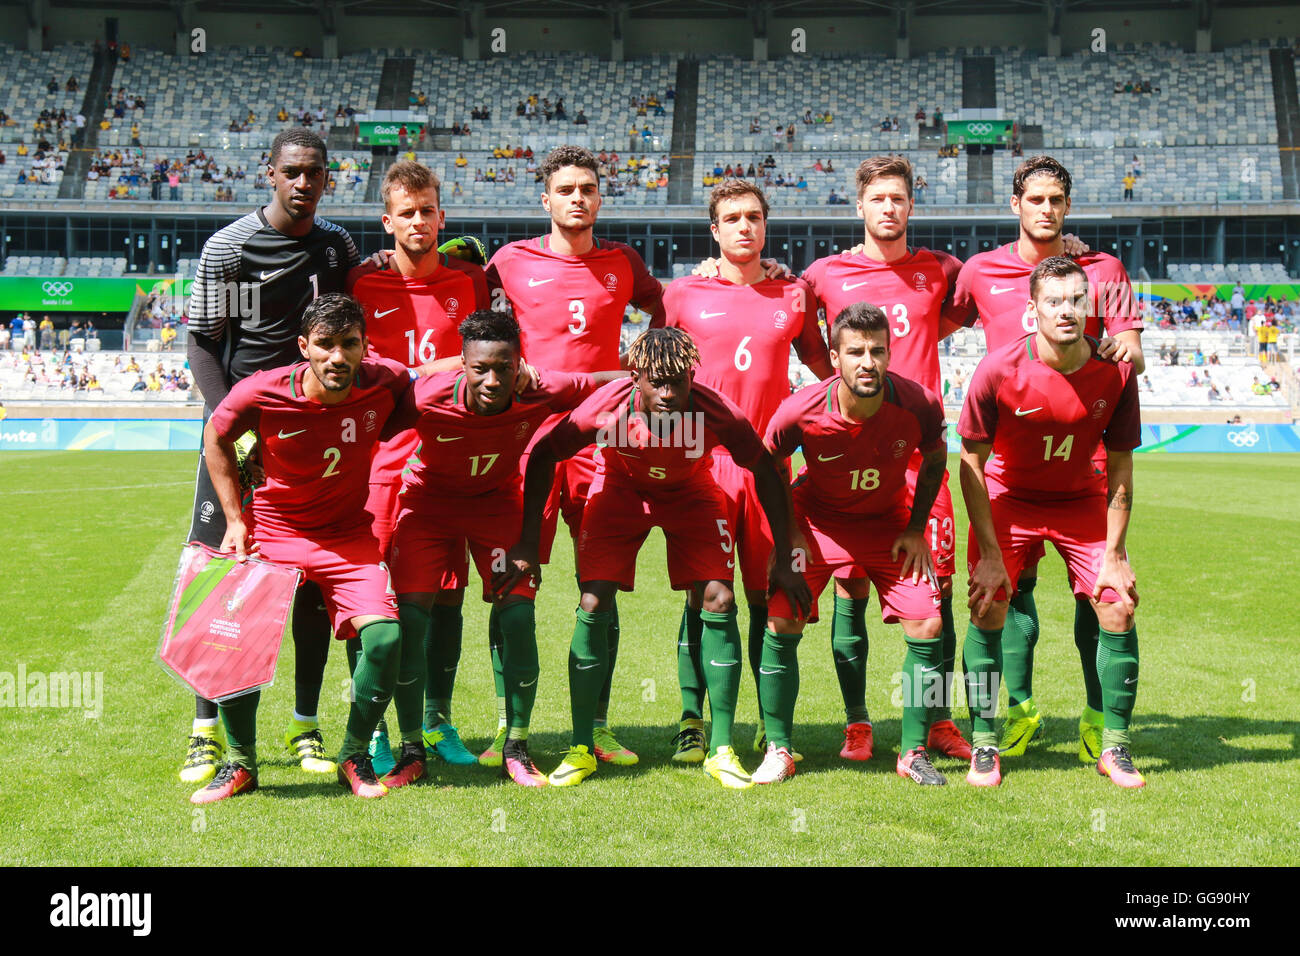 BELO HORIZONTE, MG - 10.08.2016: OLYMPICS 2016 FOOTBALL BH - Portugal  players during the match between Algeria (ALG) x Portugal (POR) by the  Football Group D Olympic Men, the 2016 Olympics held